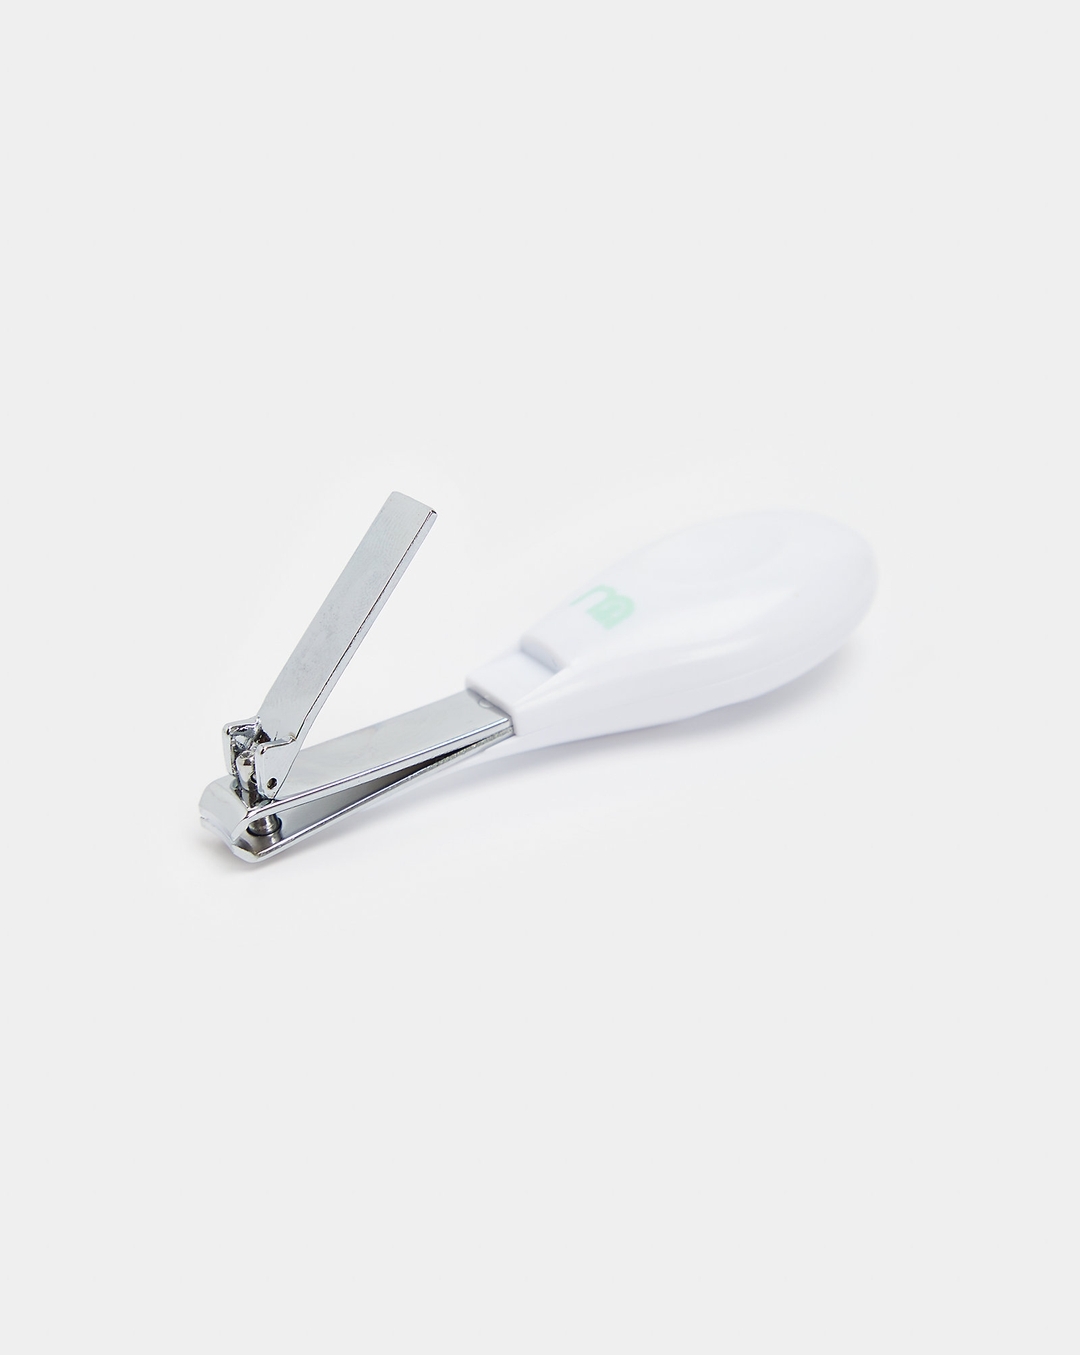 Safety 1ˢᵗ Clear View Nail Clippers, White - Walmart.com